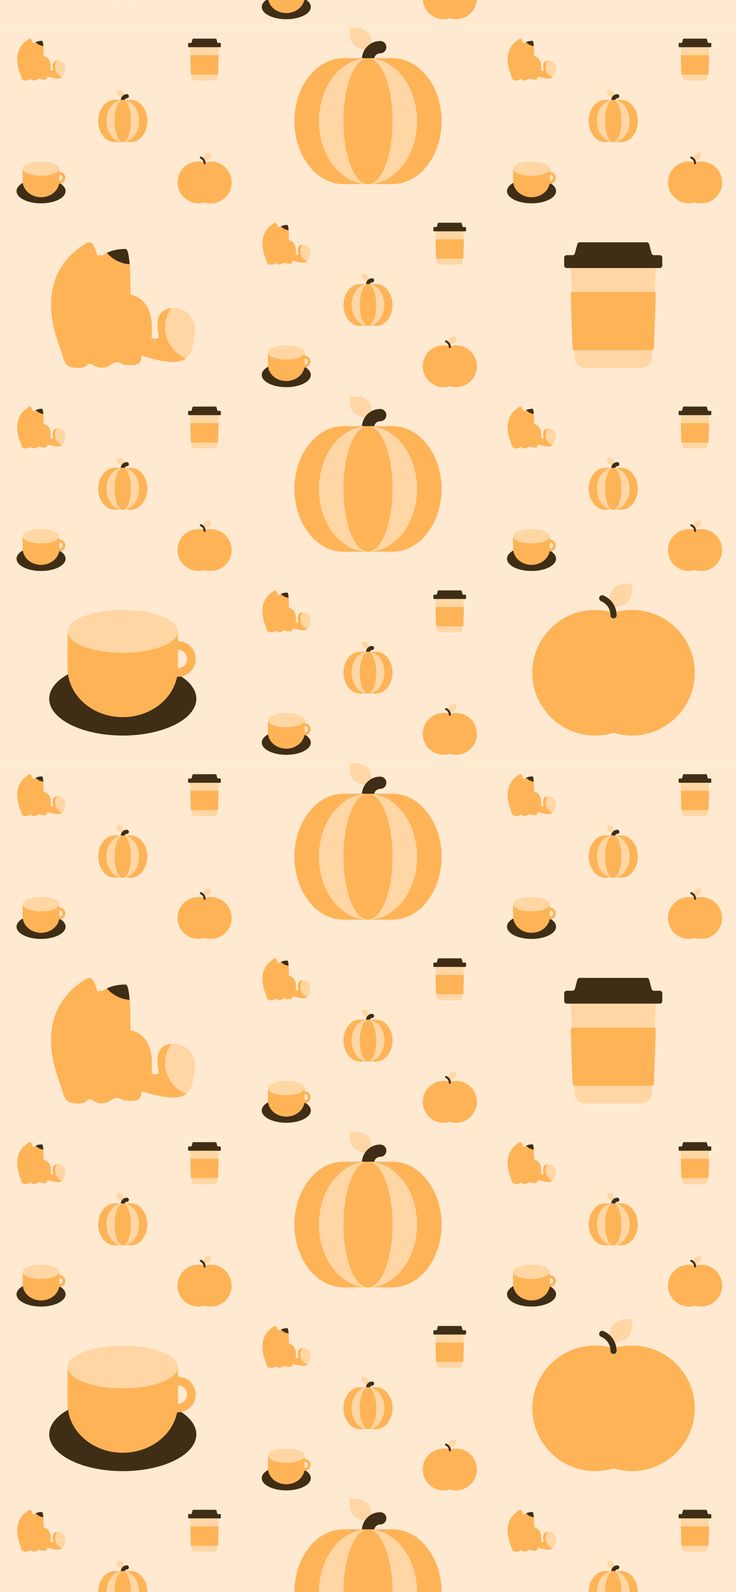 Cozy Fall Wallpaper For Your Phone Like Cats Very Much. Fall wallpaper, Cozy fall, Wallpaper for your phone